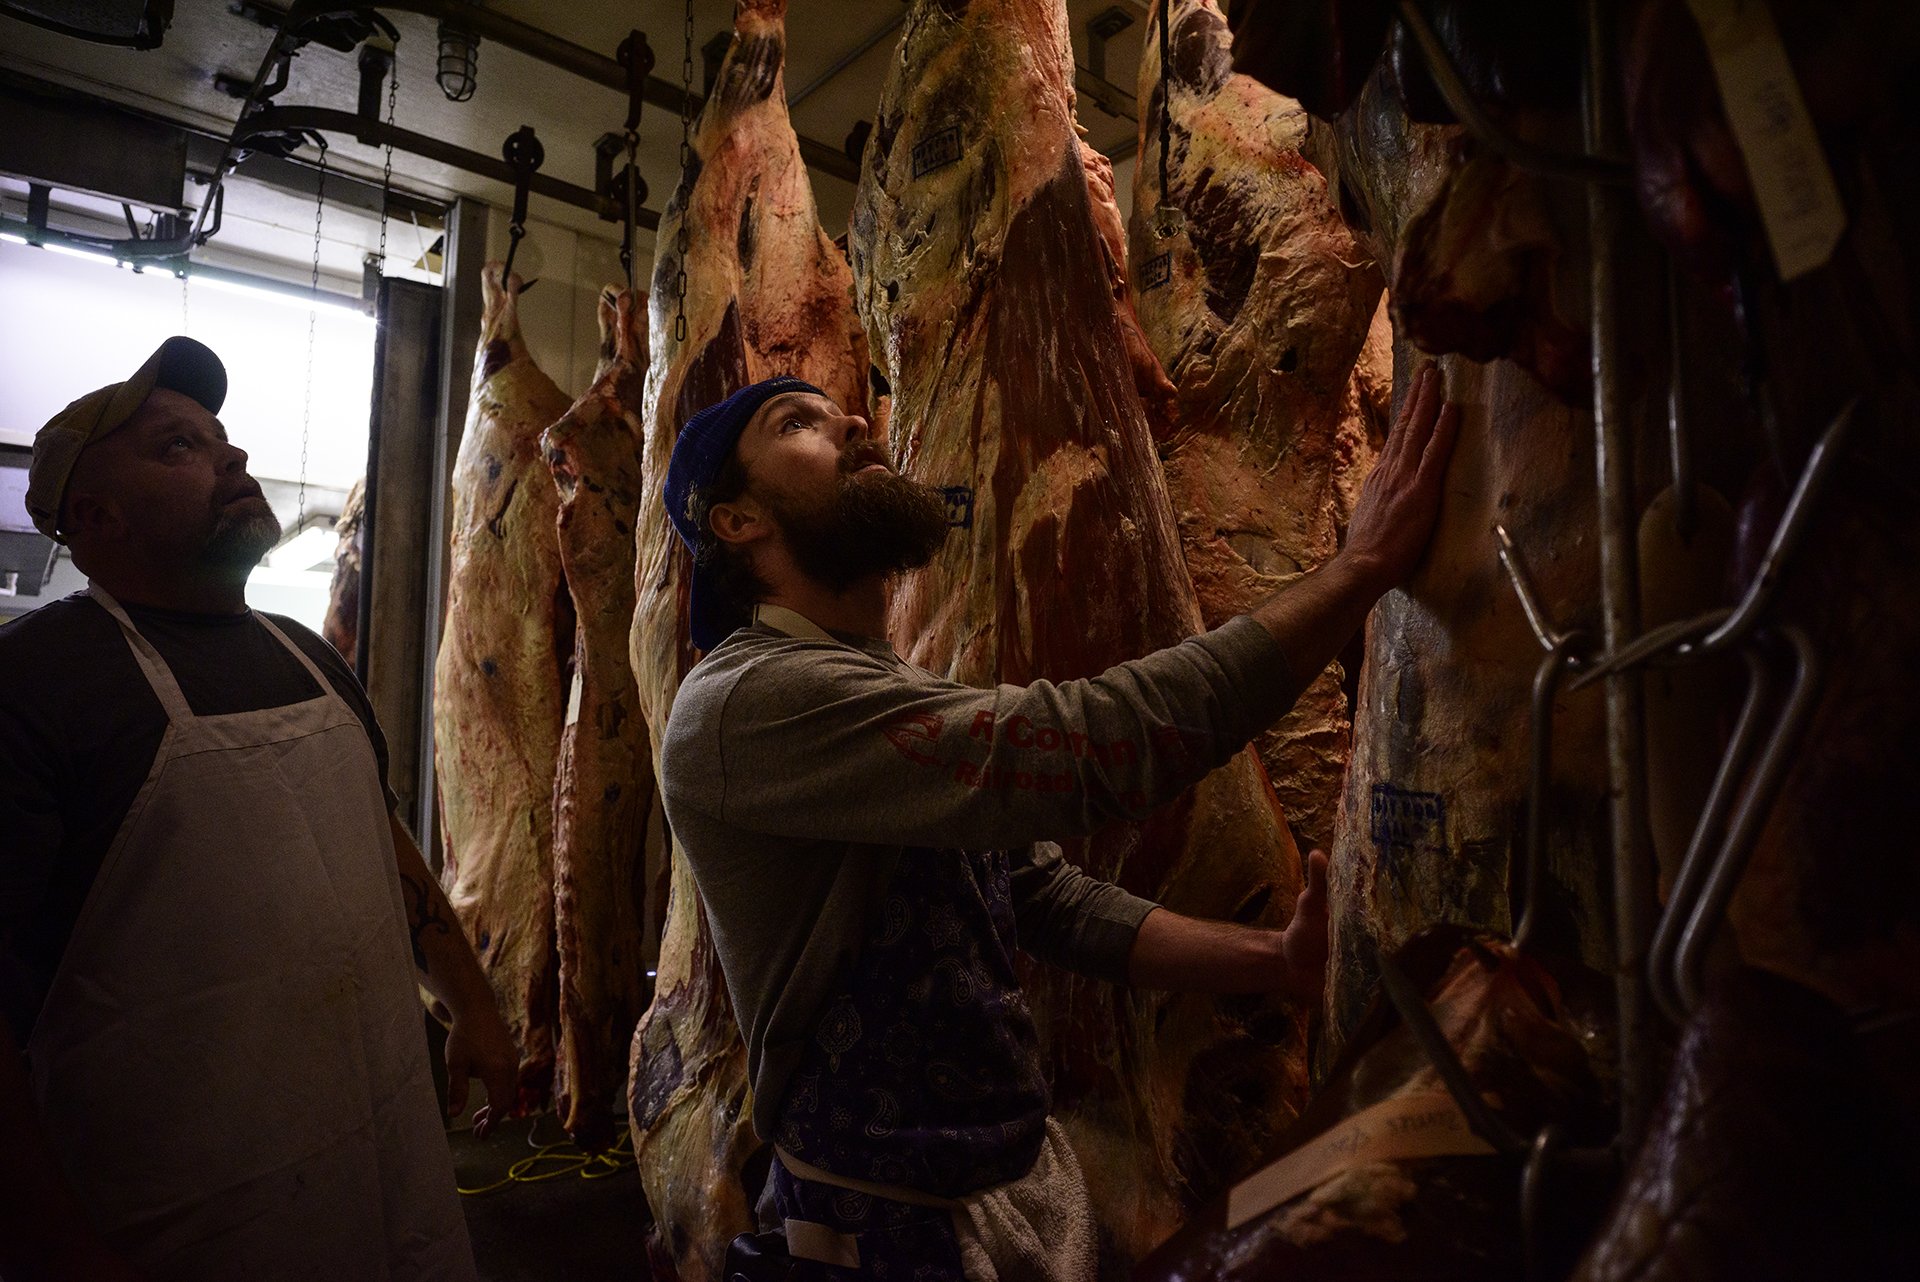  Joe Wood and Jesse Florence rearrange some beef to get to the order needed for processing at the Riverview Meat Company on Tuesday, May 25, 2021.   The Riverview Meat Company is Harrison County's only meatpacking establishment. The meatpacking indus